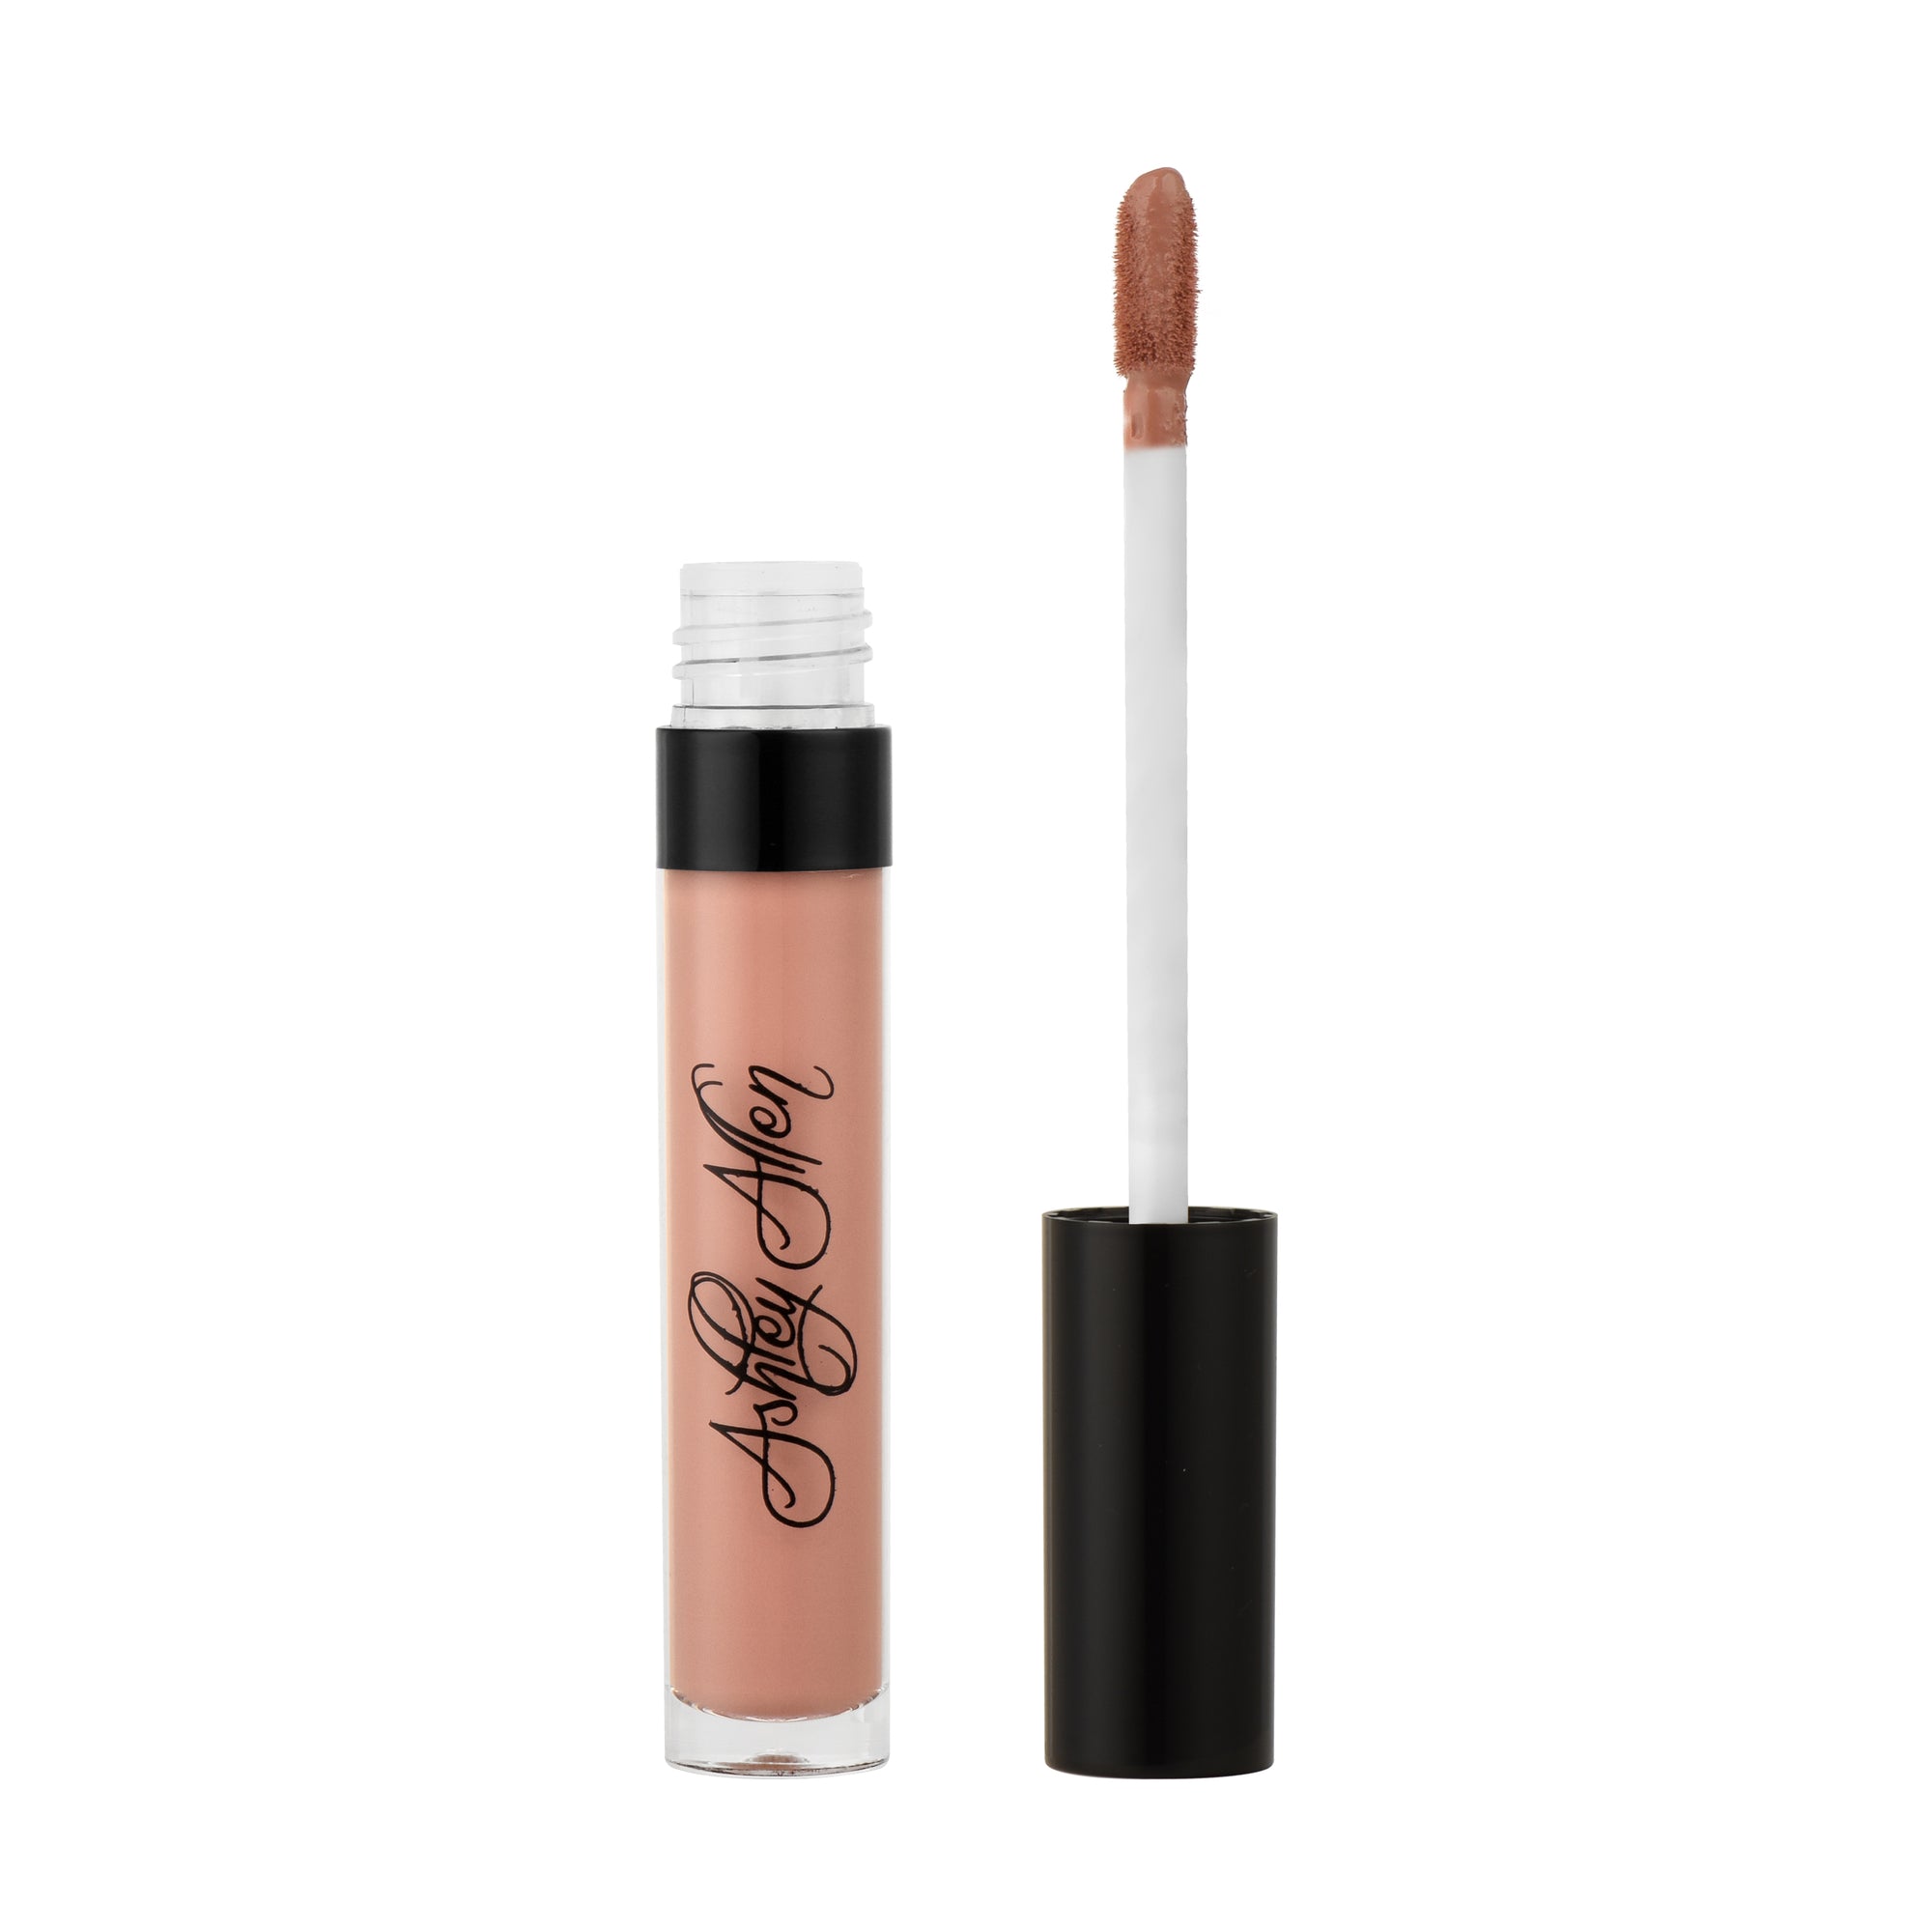 Matte Lip - N222 (50% OFF) will be $12.50 activated at checkout